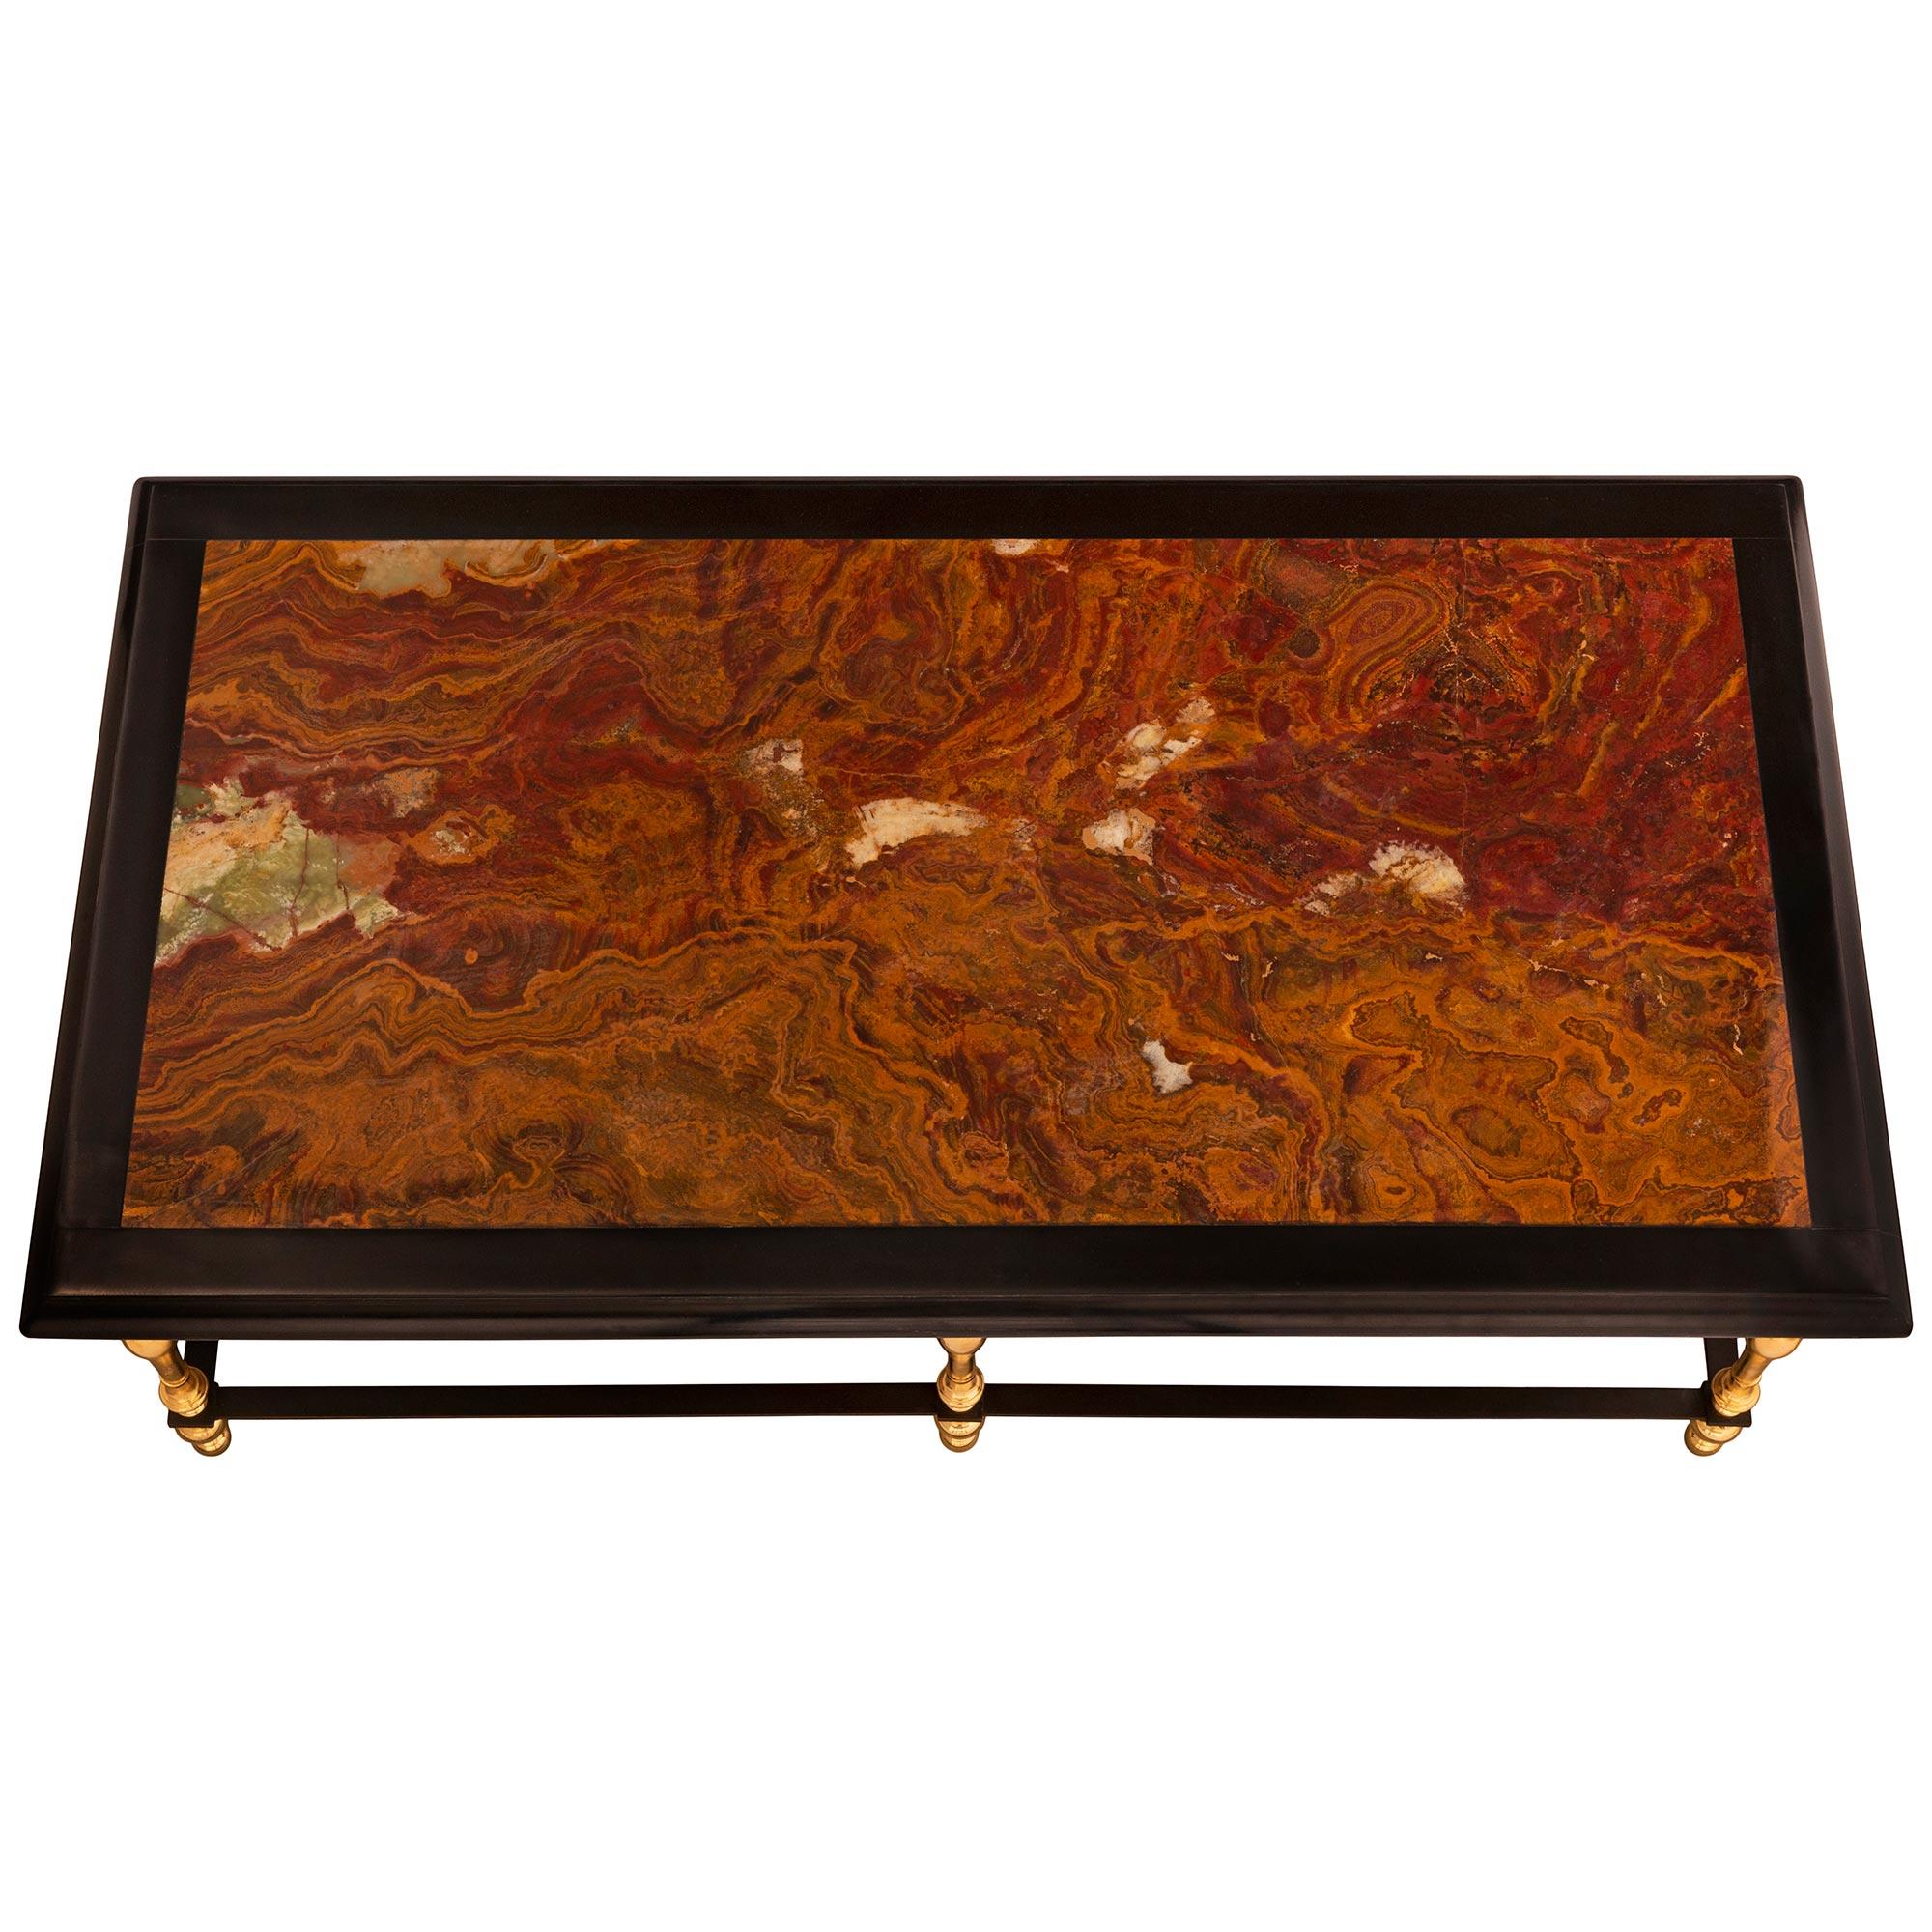 A beautiful Continental 19th century Louis XIV st. ormolu, patinated bronze, Alabastro and black Belgian marble coffee table. The rectangular coffee table is raised by six elegant and most decorative turned ormolu supports with baluster shapes and